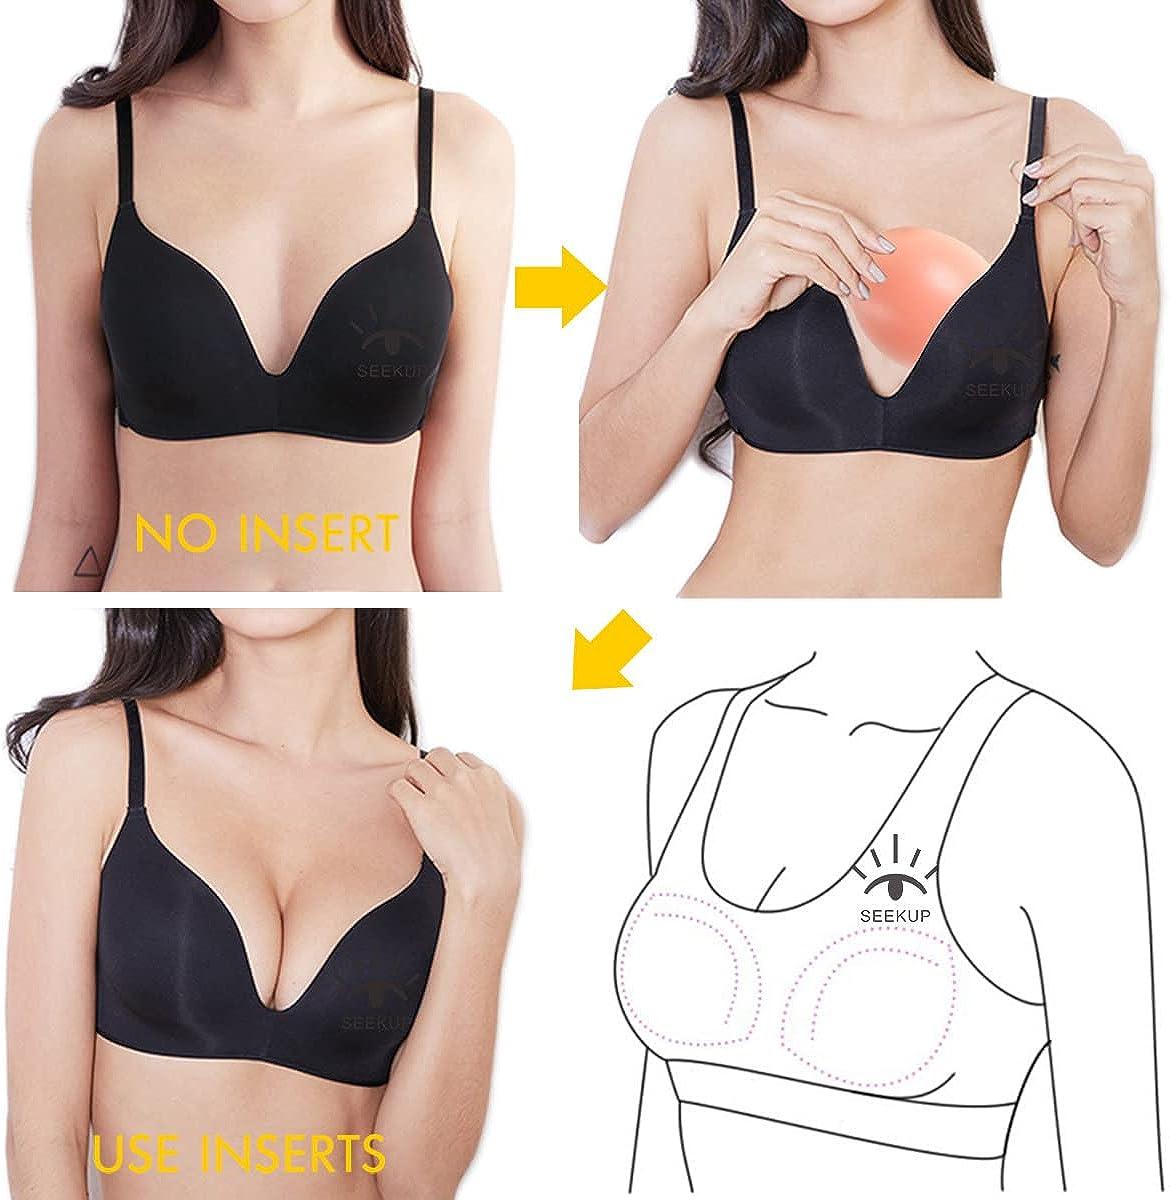 Silicone Bra Inserts And Breast Enhancers, Increase Your Cup Size